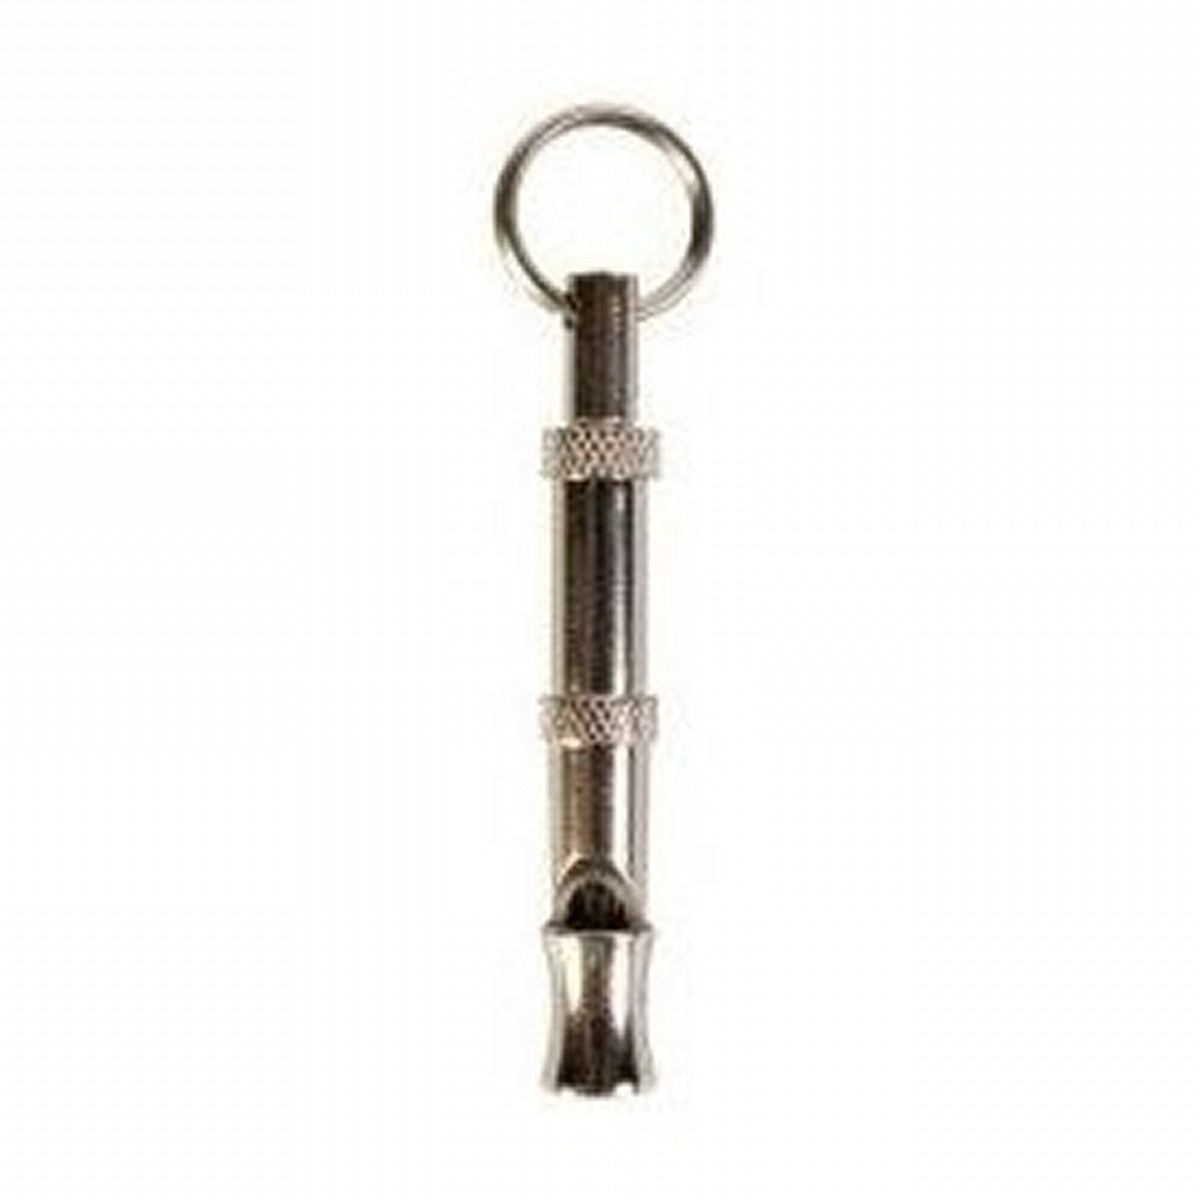 Metal whistle for dog training